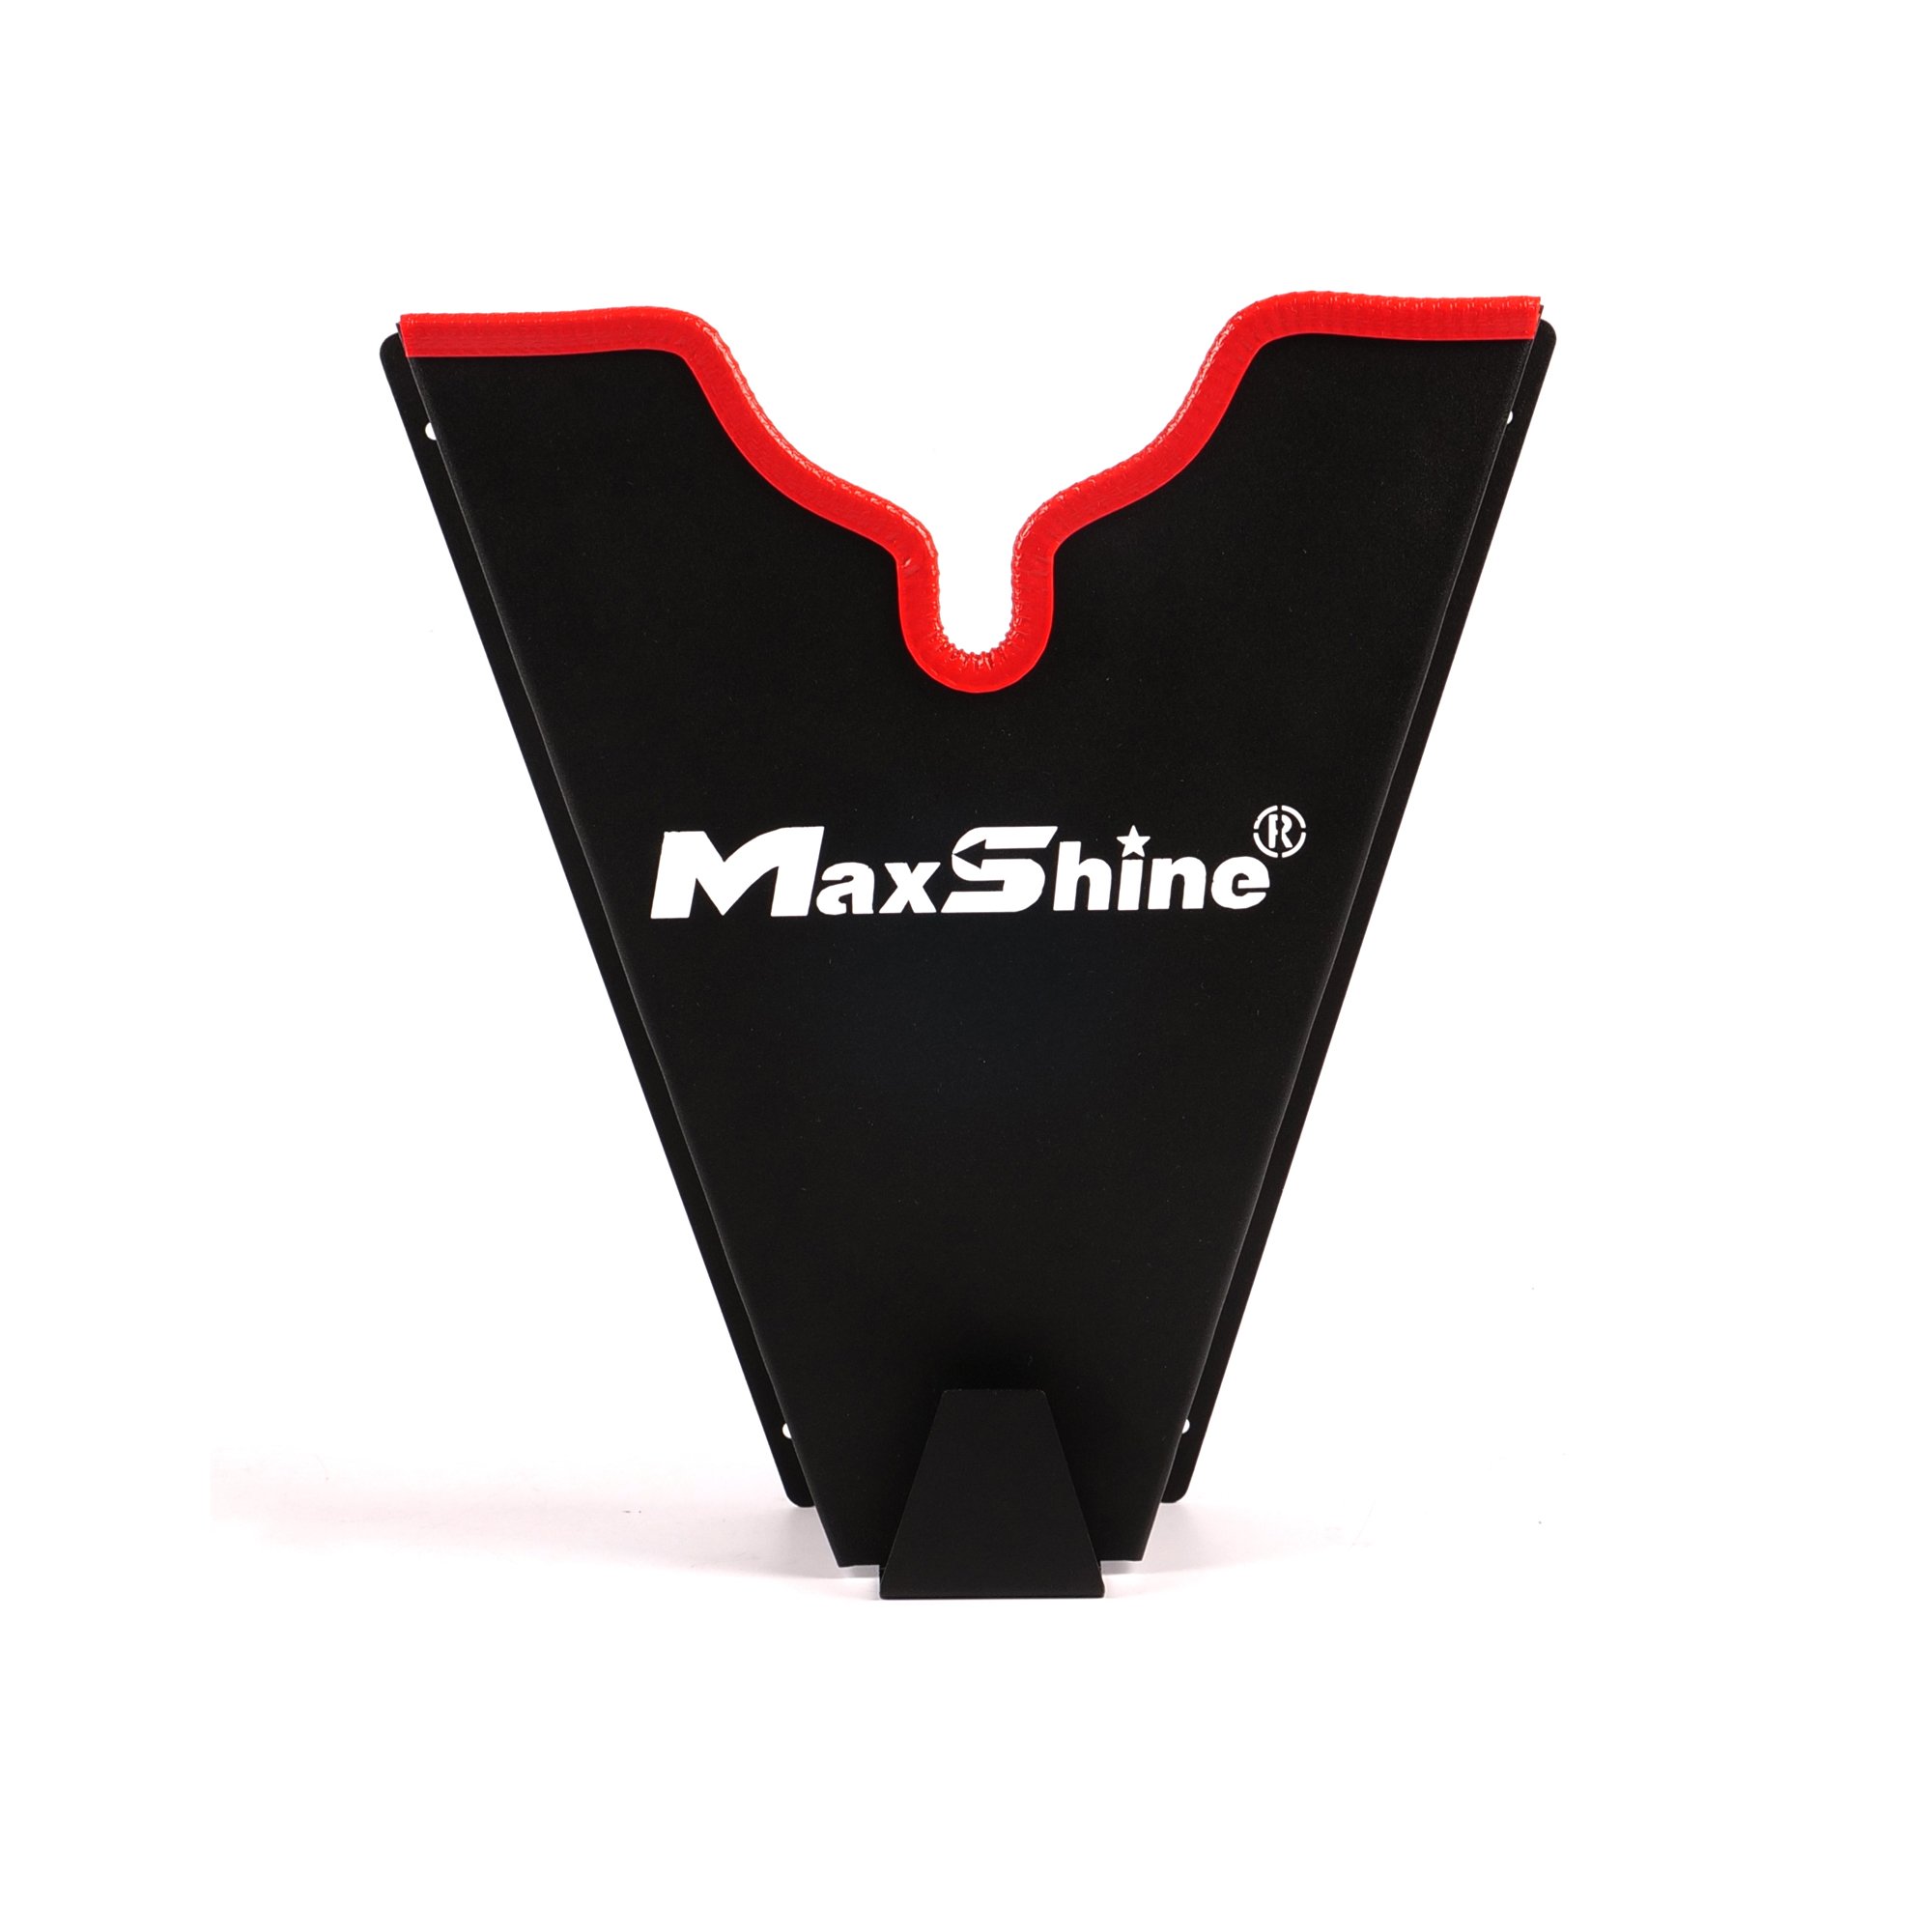 Maxshine Polisher Holder/Rack for Holding The Polisher Red, Single Station-1pc and Double Station-1pc 